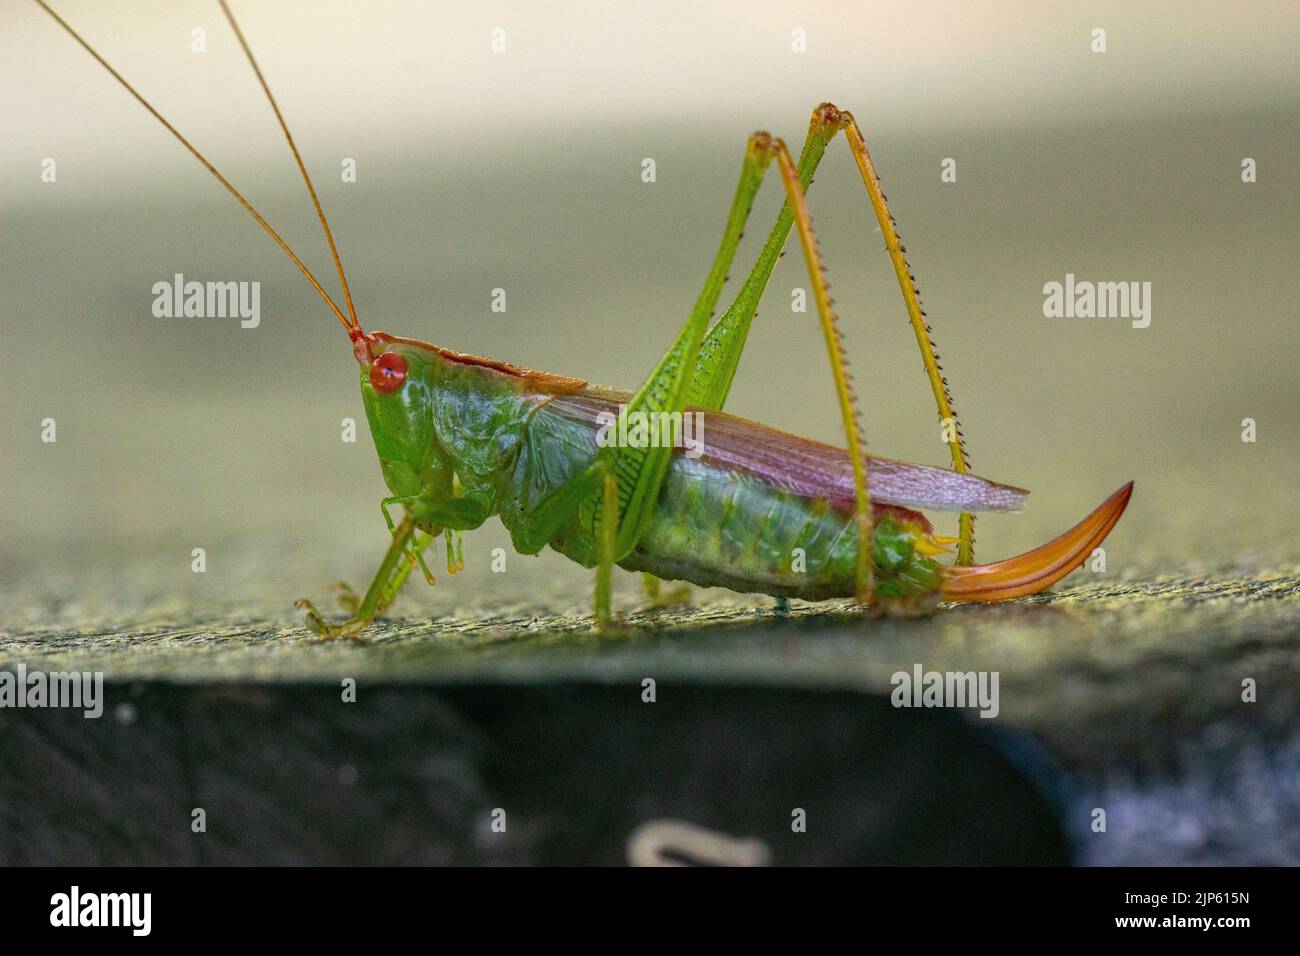 Colorful Grasshopper ready to jump Stock Photo